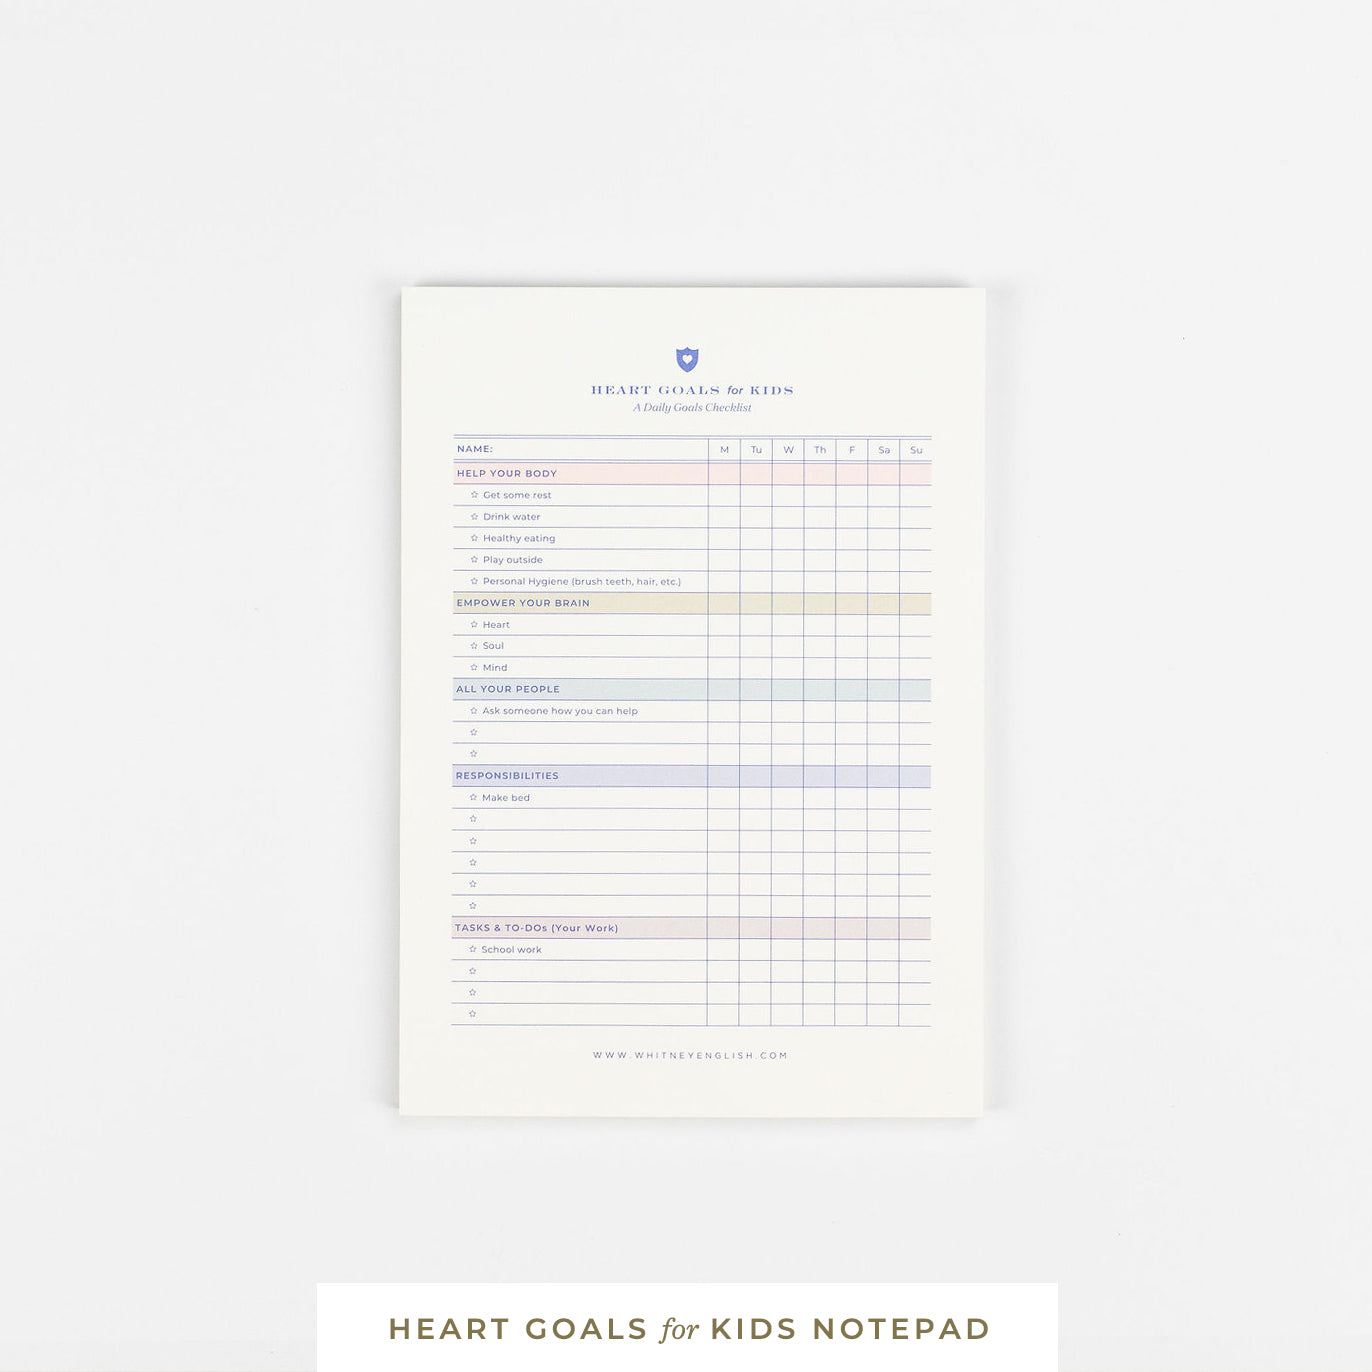 Notepad • Sticky • HEART Goals™ for Kids